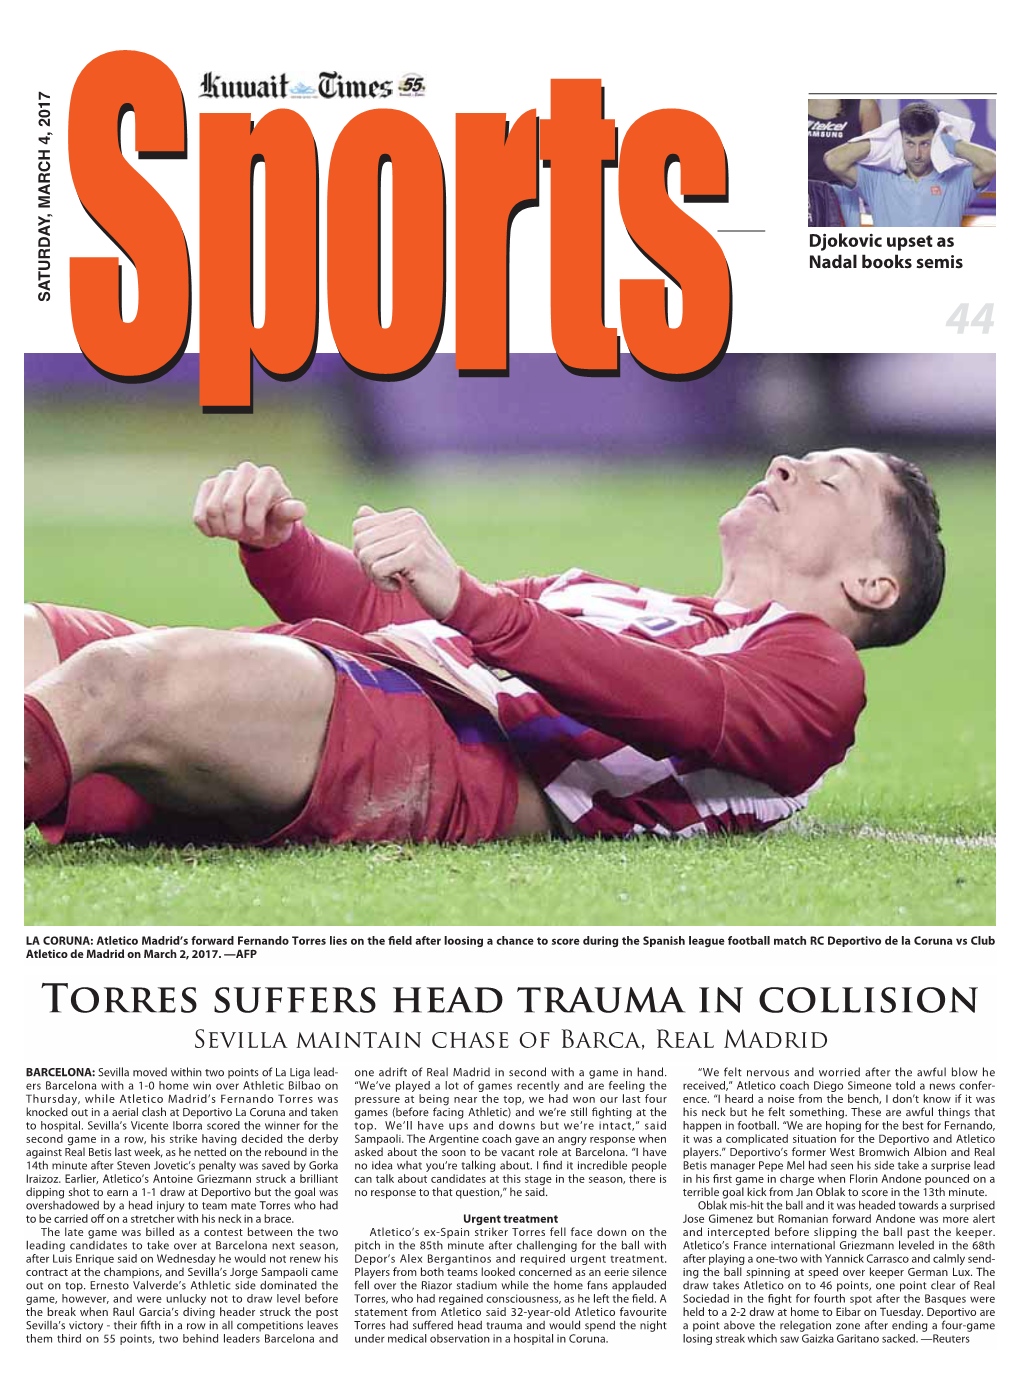 Torres Suffers Head Trauma in Collision Sevilla Maintain Chase of Barca, Real Madrid